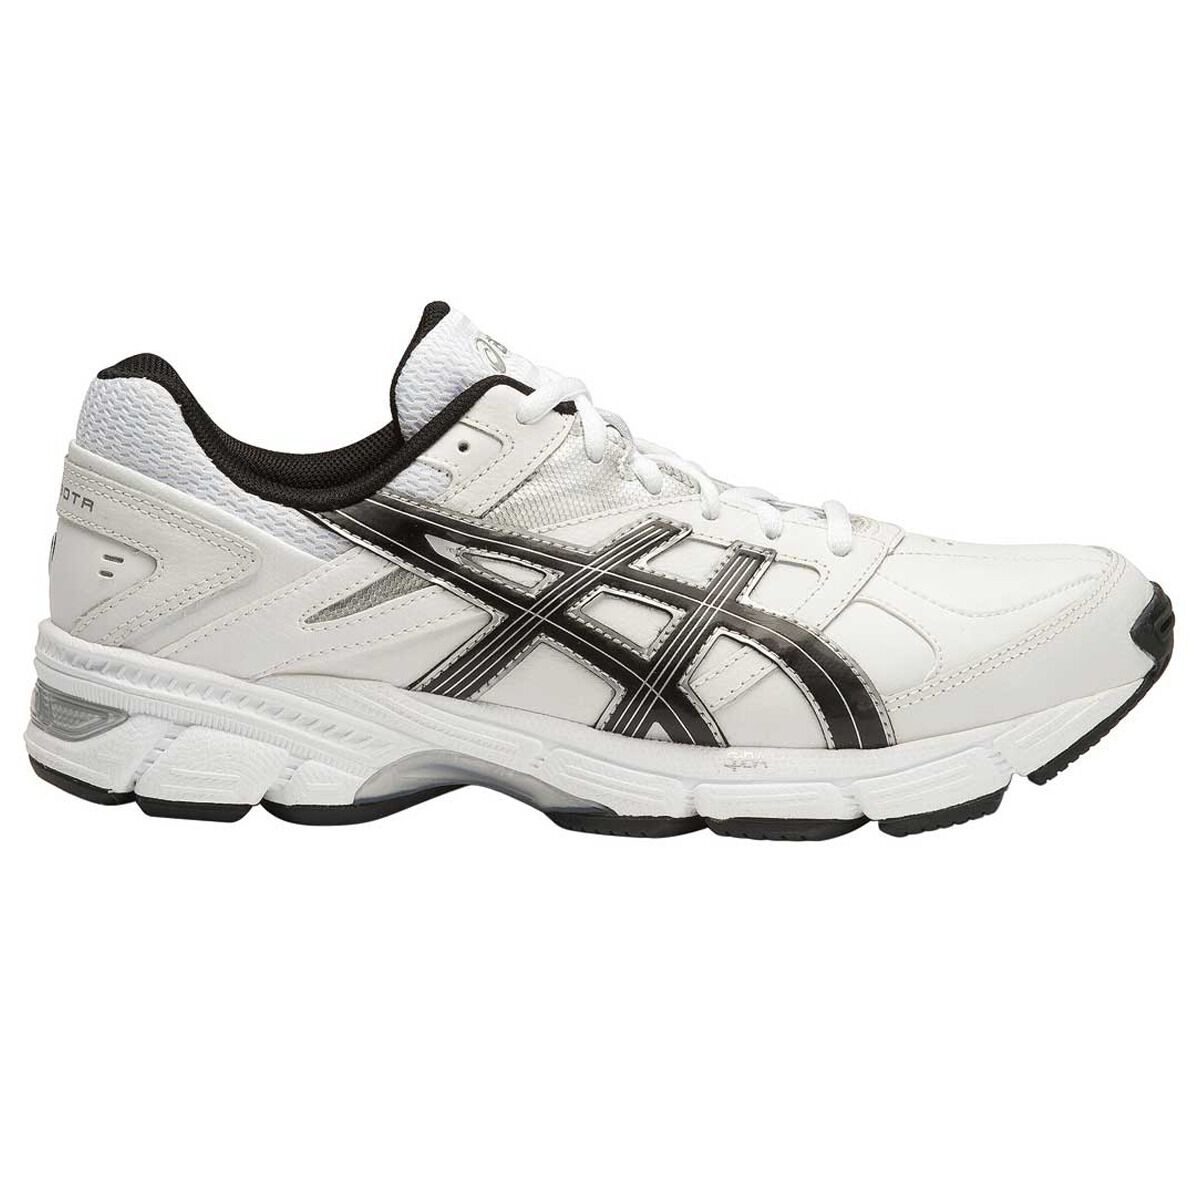 asics leather shoes